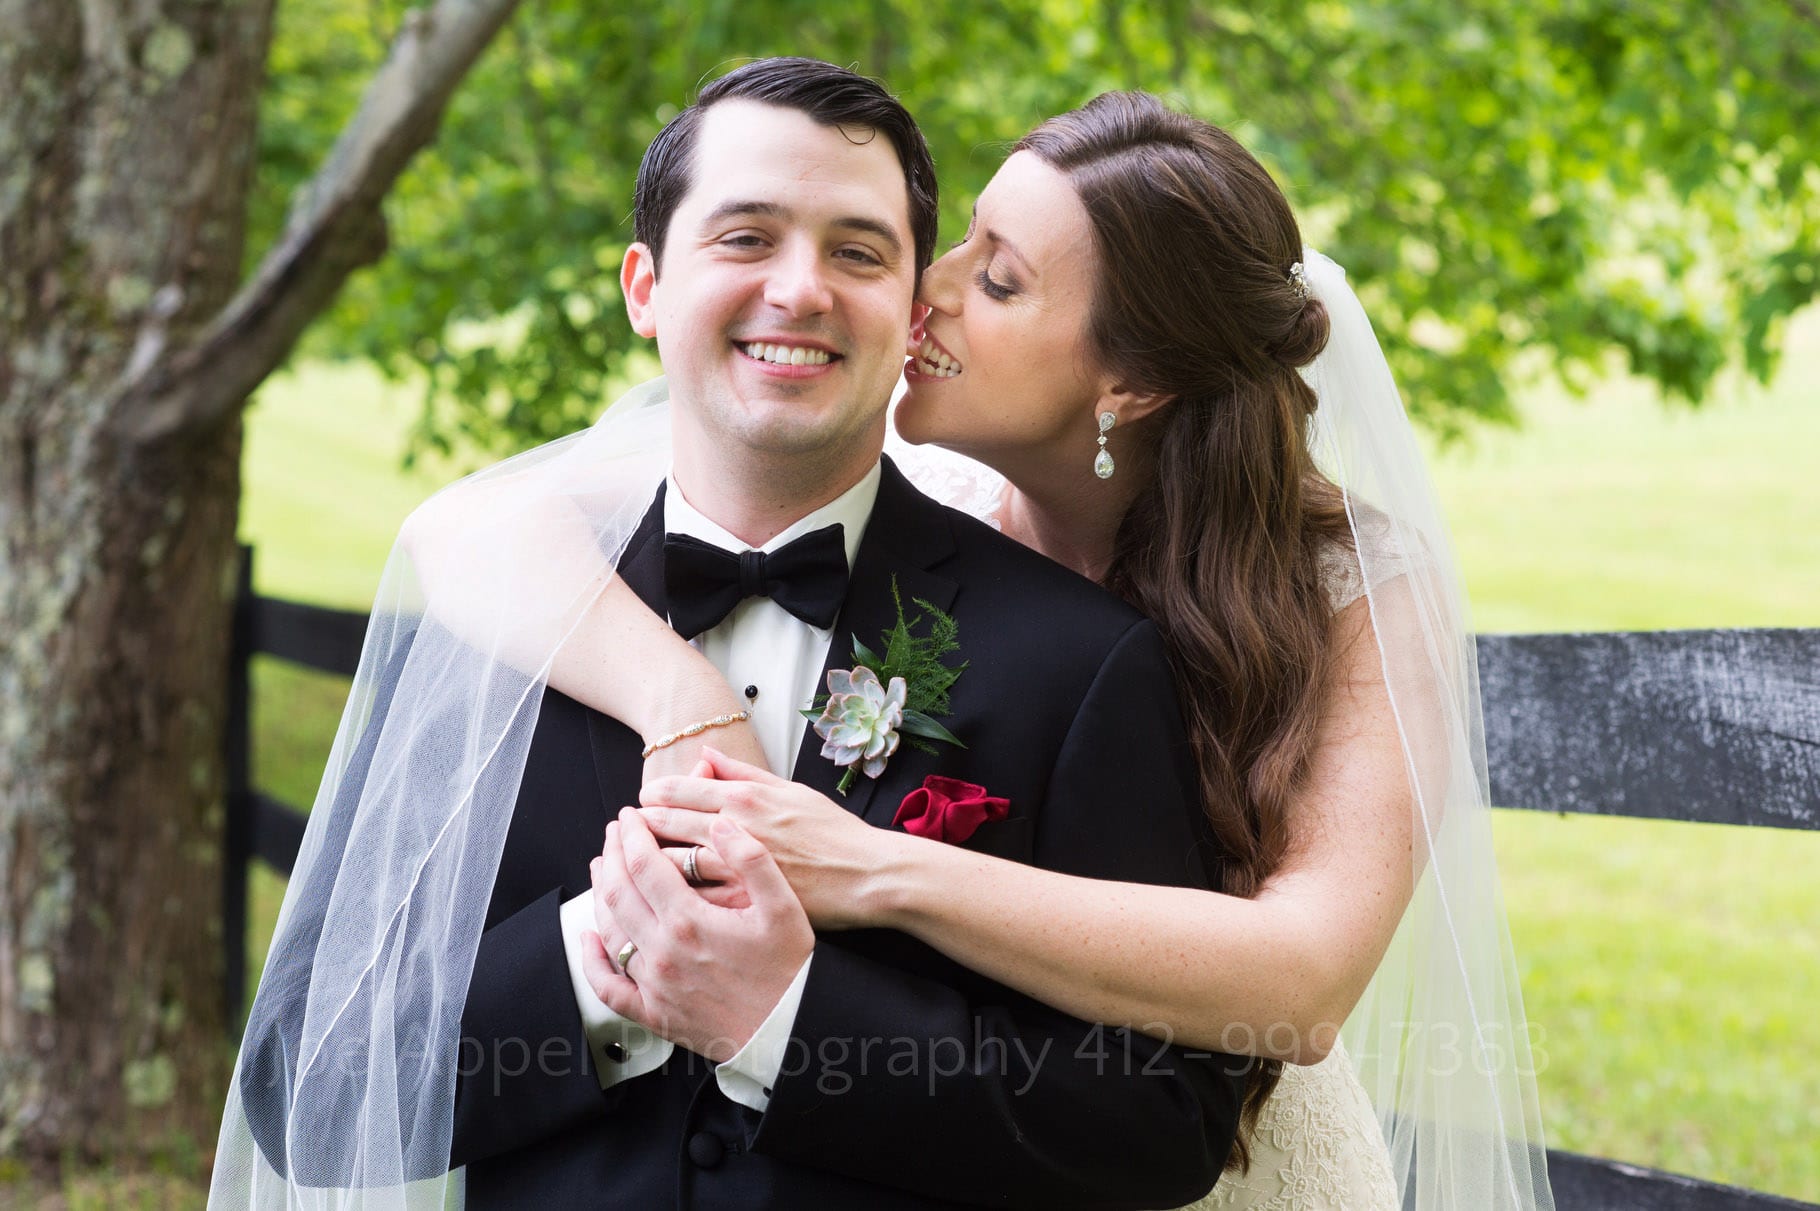 A bride wraps her arms around her tuxedoed groom as she playfully bites his ear lobe during their Chanteclaire Farm Wedding.